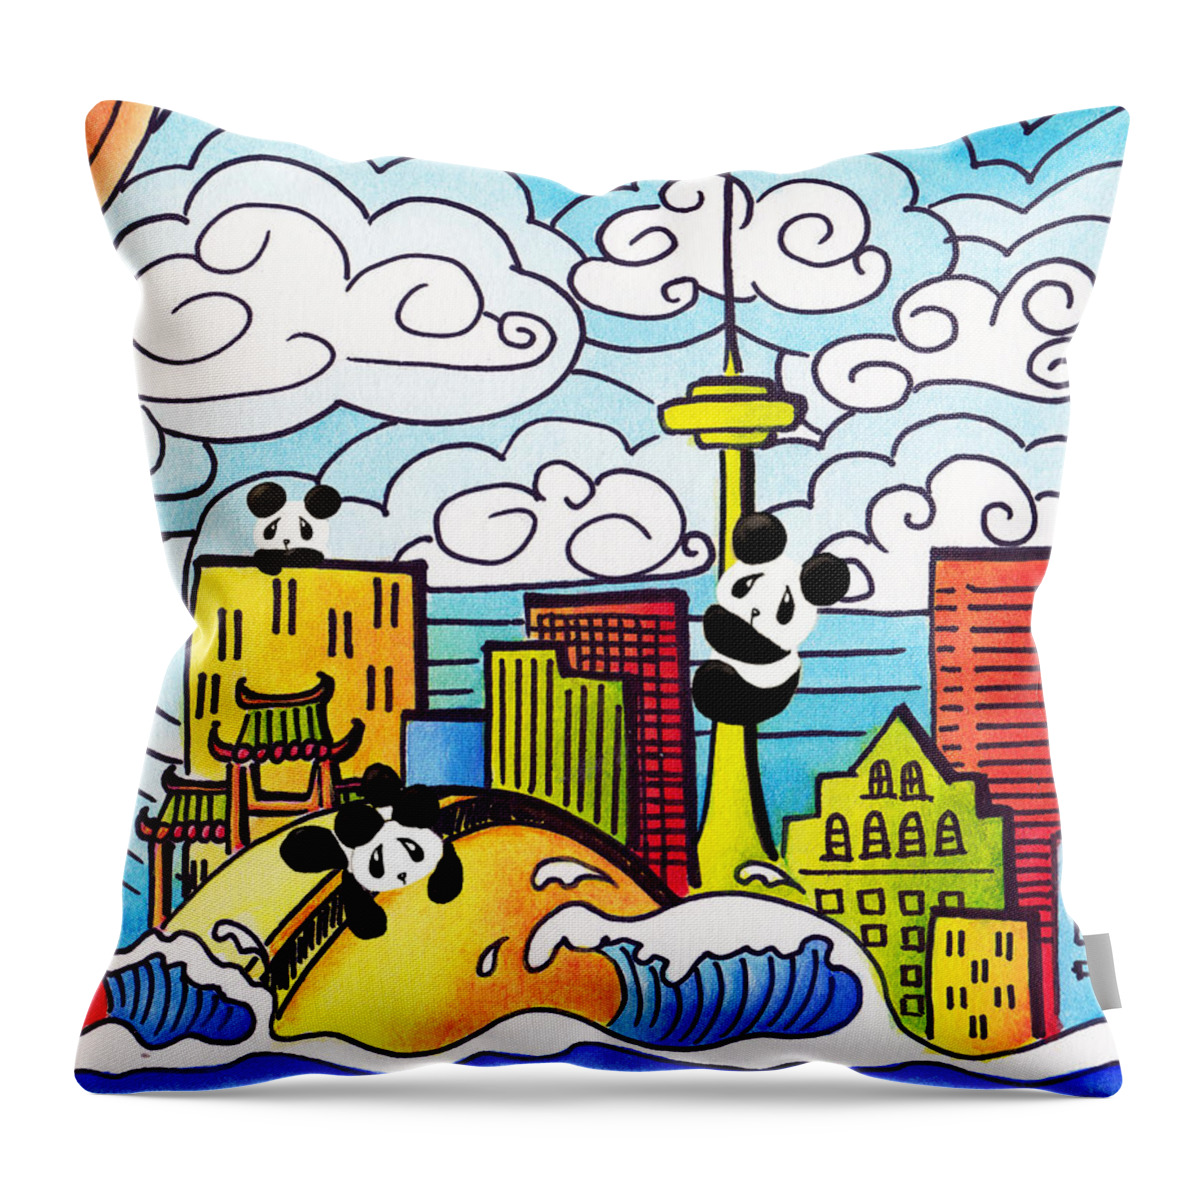 Panda Throw Pillow featuring the painting Pandas In Toronto by Oiyee At Oystudio